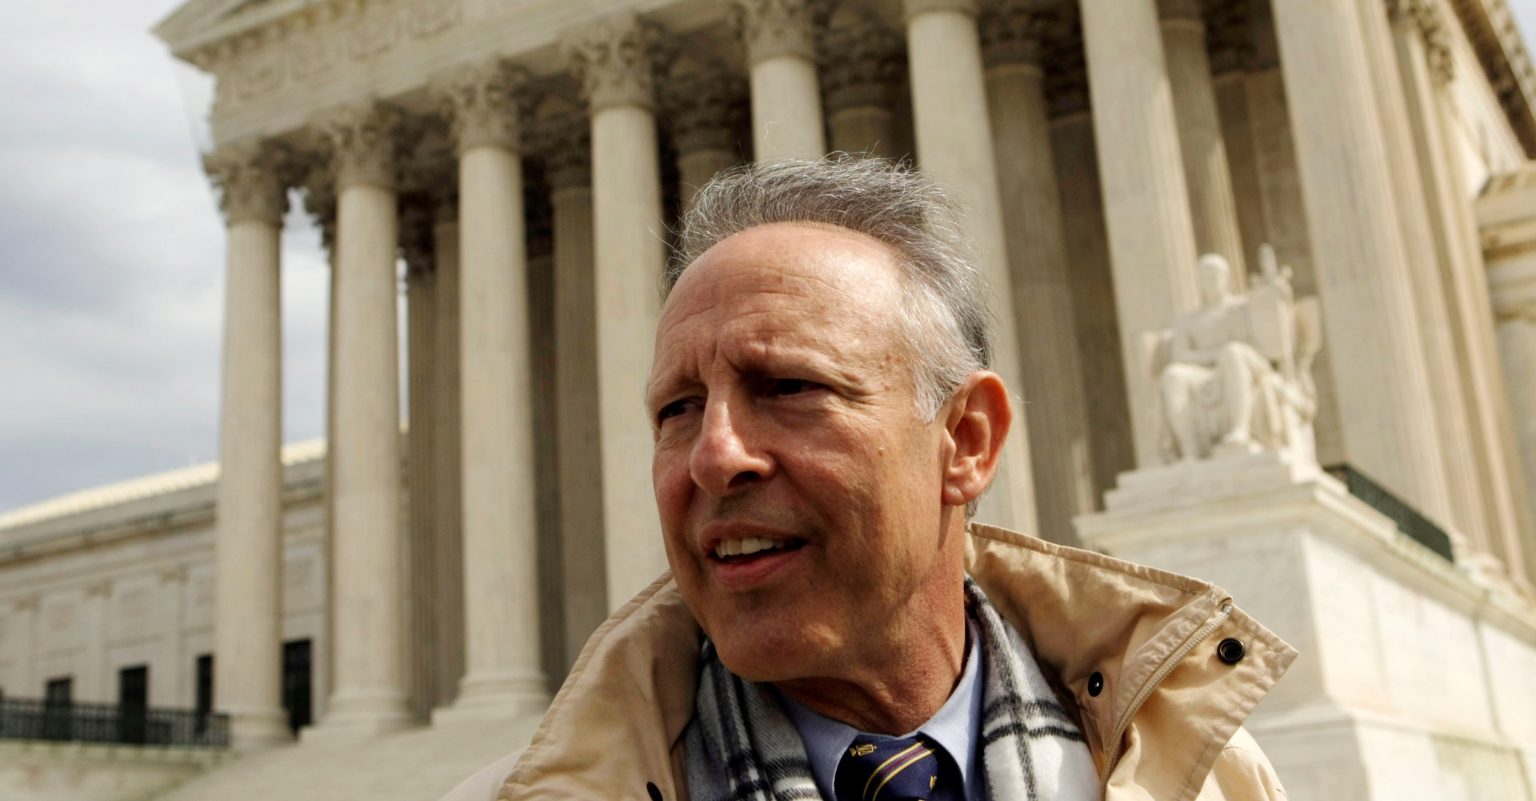 Dick Heller's 2008 Supreme Court Case Was Just the Beginning of His